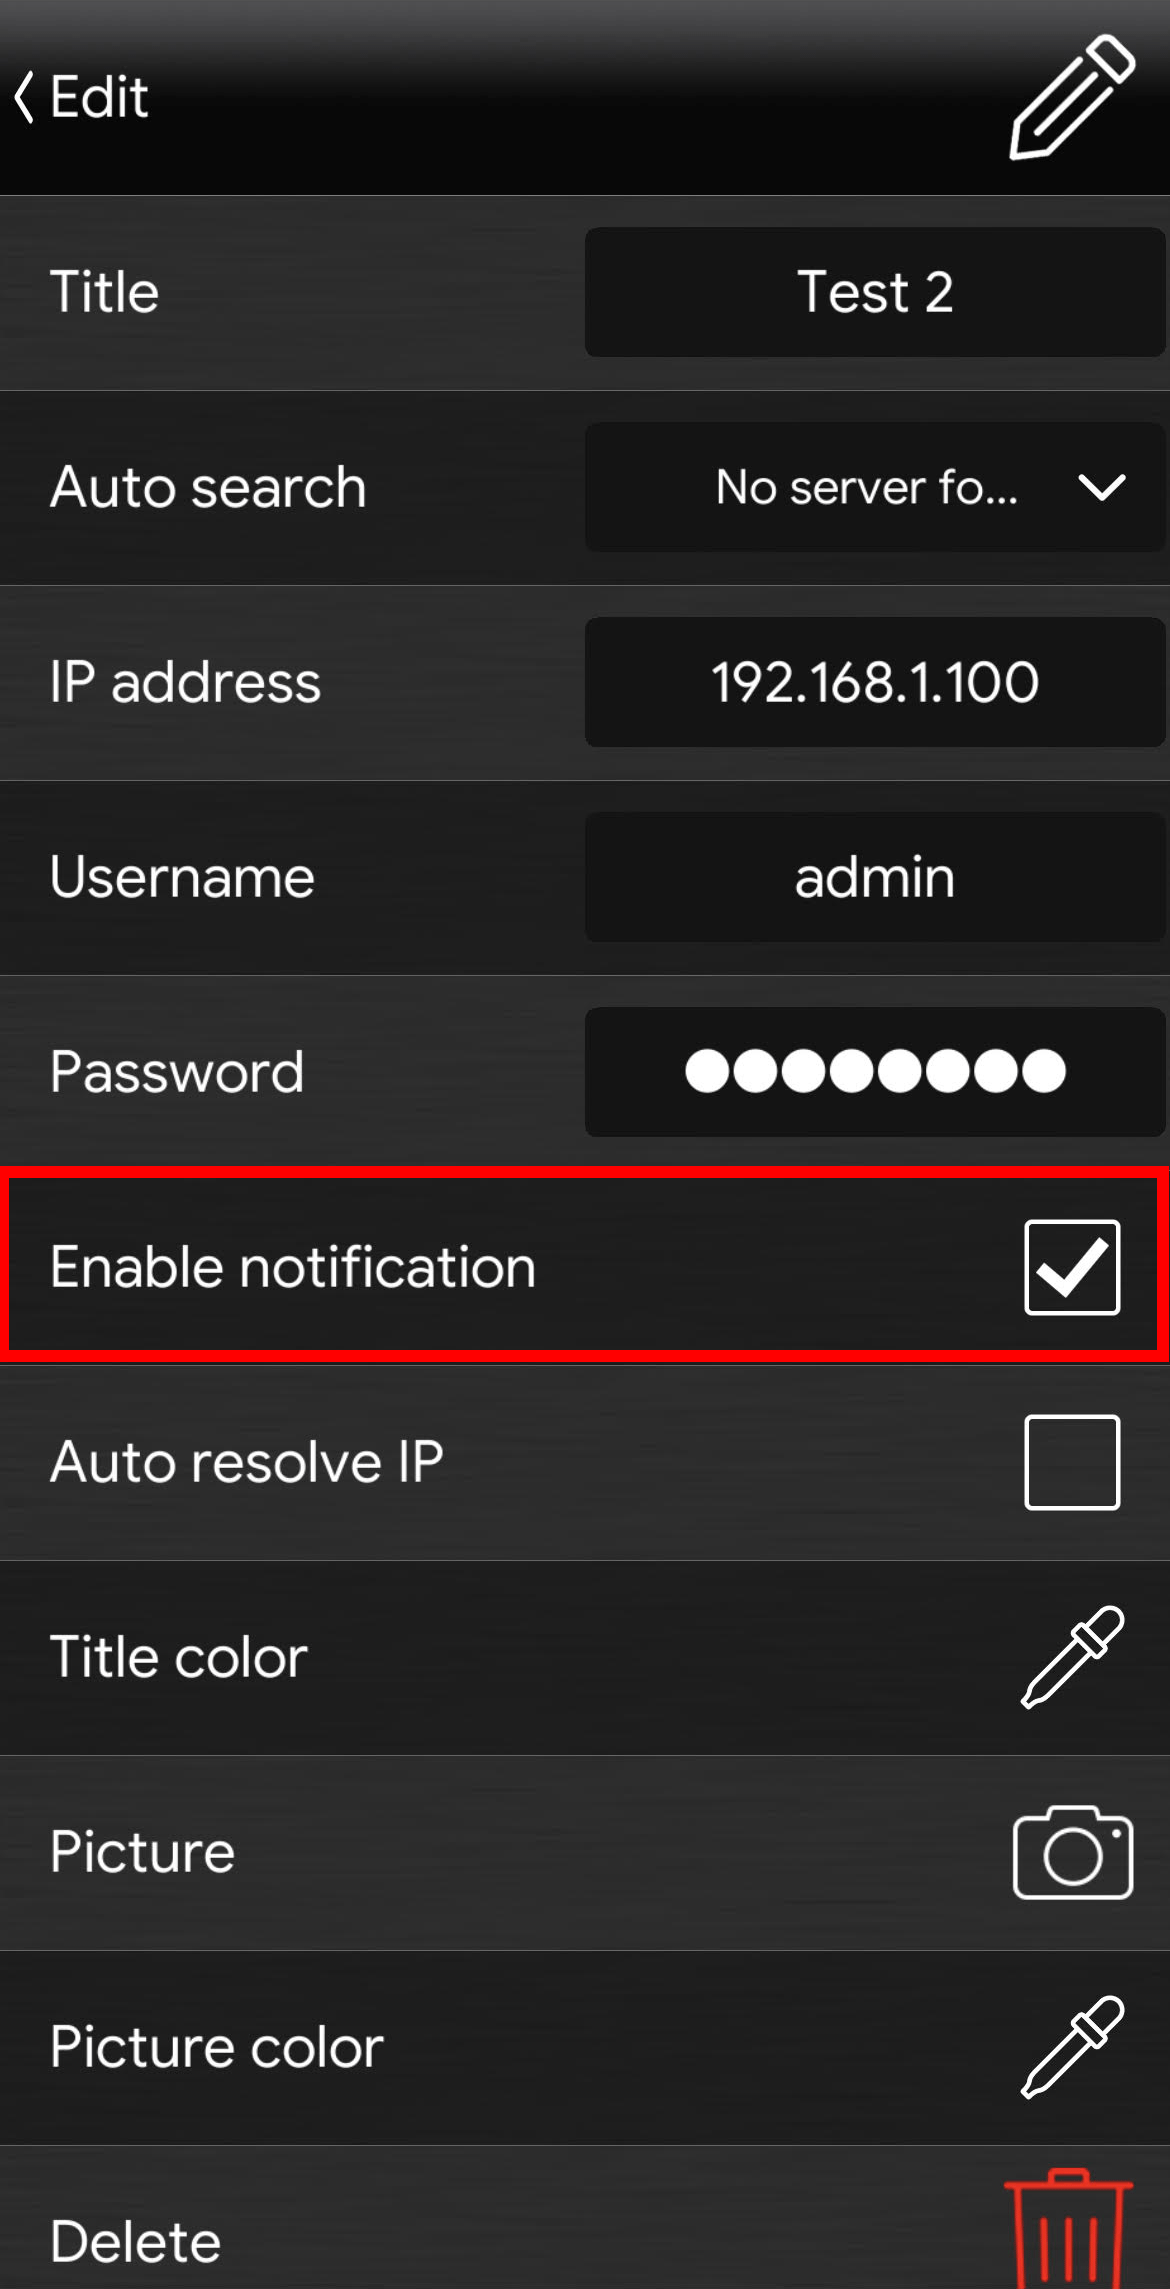 Notification enable within the Ilevia EVE Remote Plus app